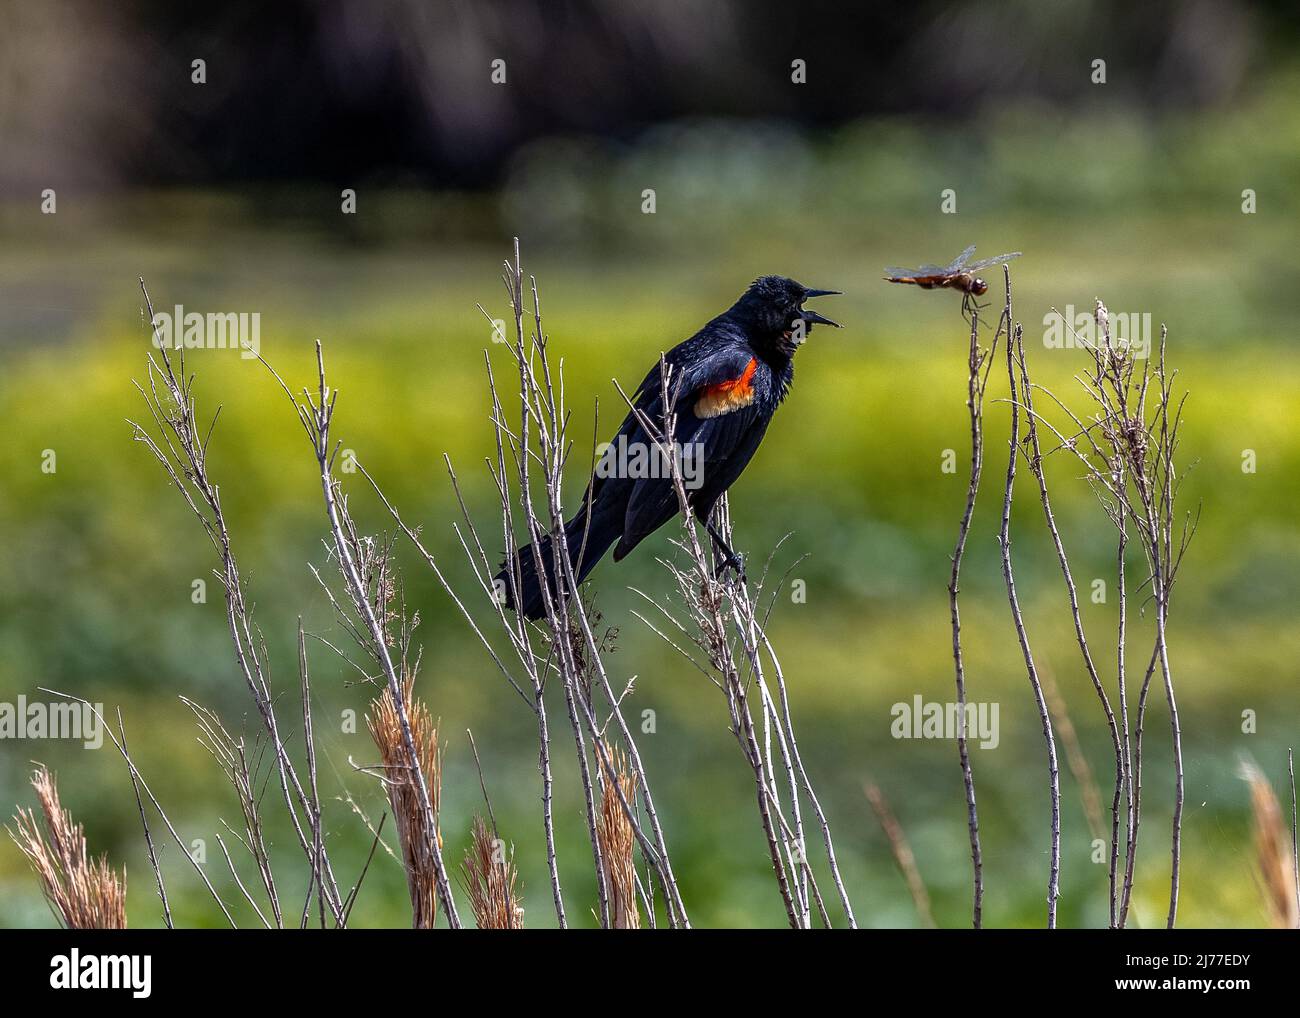 Red-winged blackbird looks like it's about to eat a dragonfly but that was not the case it was just calling out Stock Photo